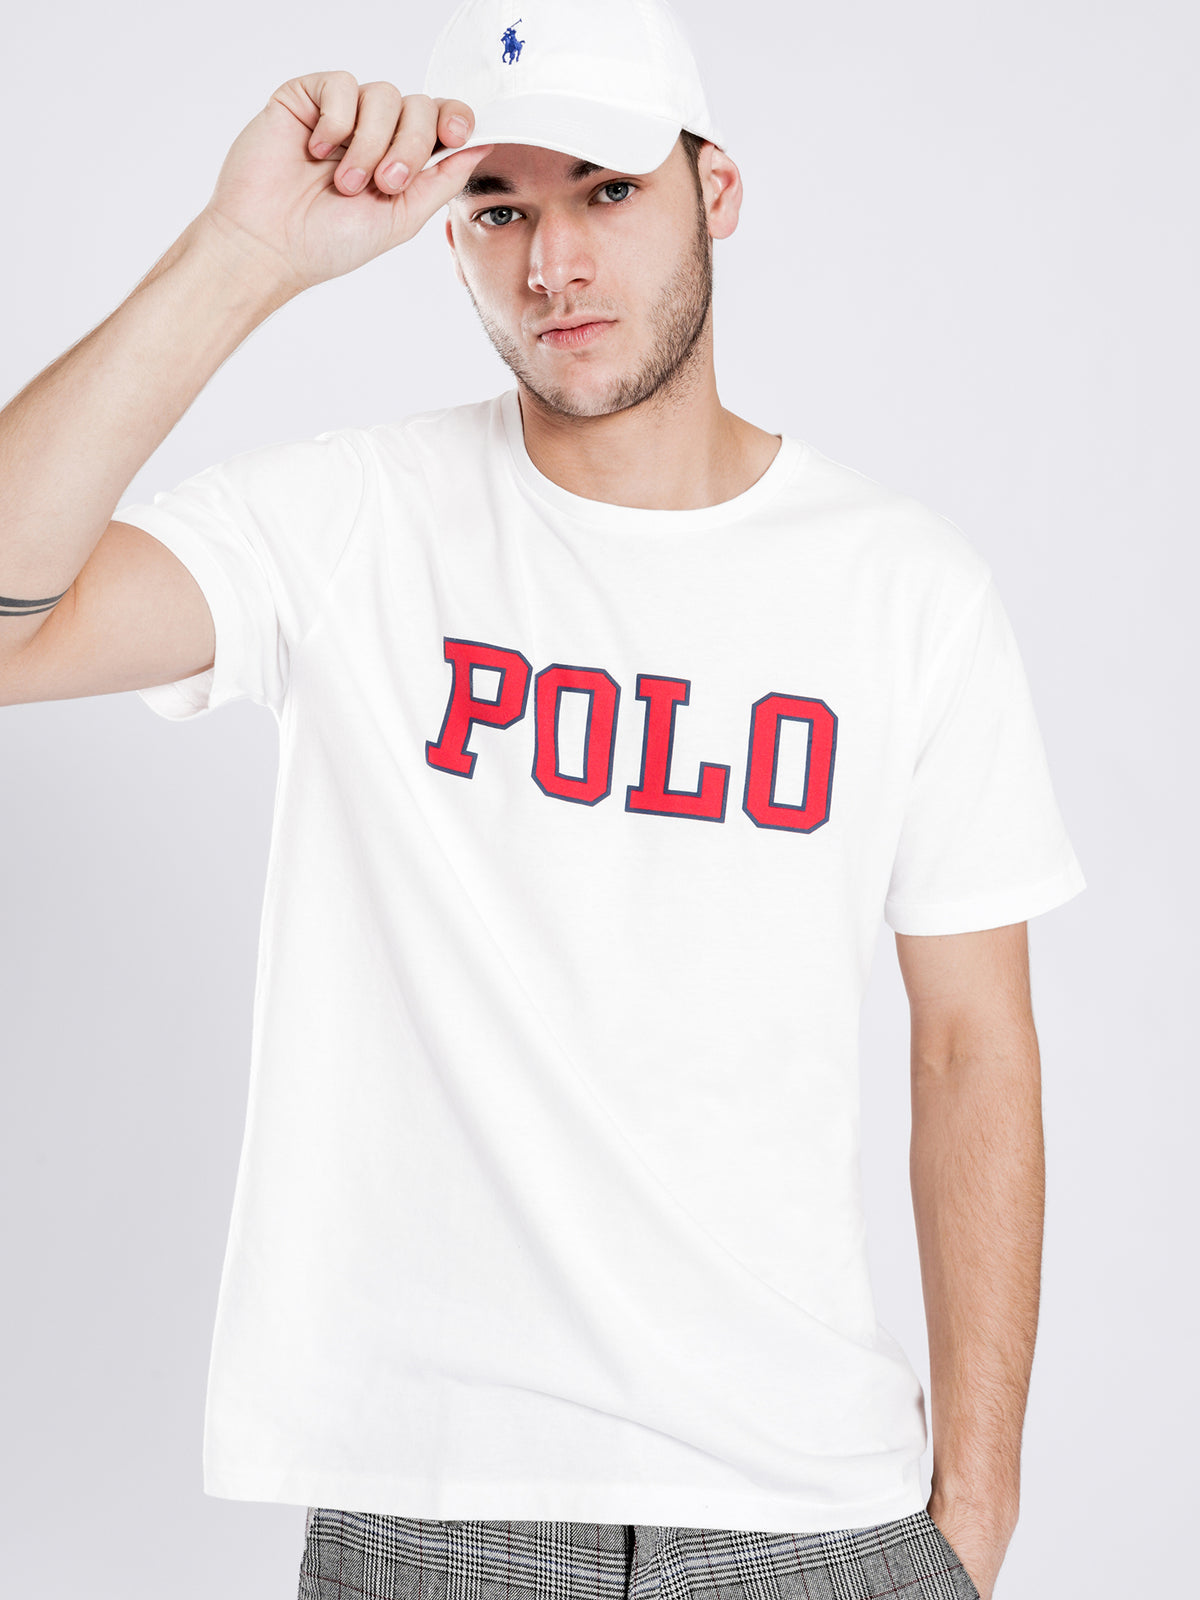 Classic Fit Short Sleeve T-Shirt in White